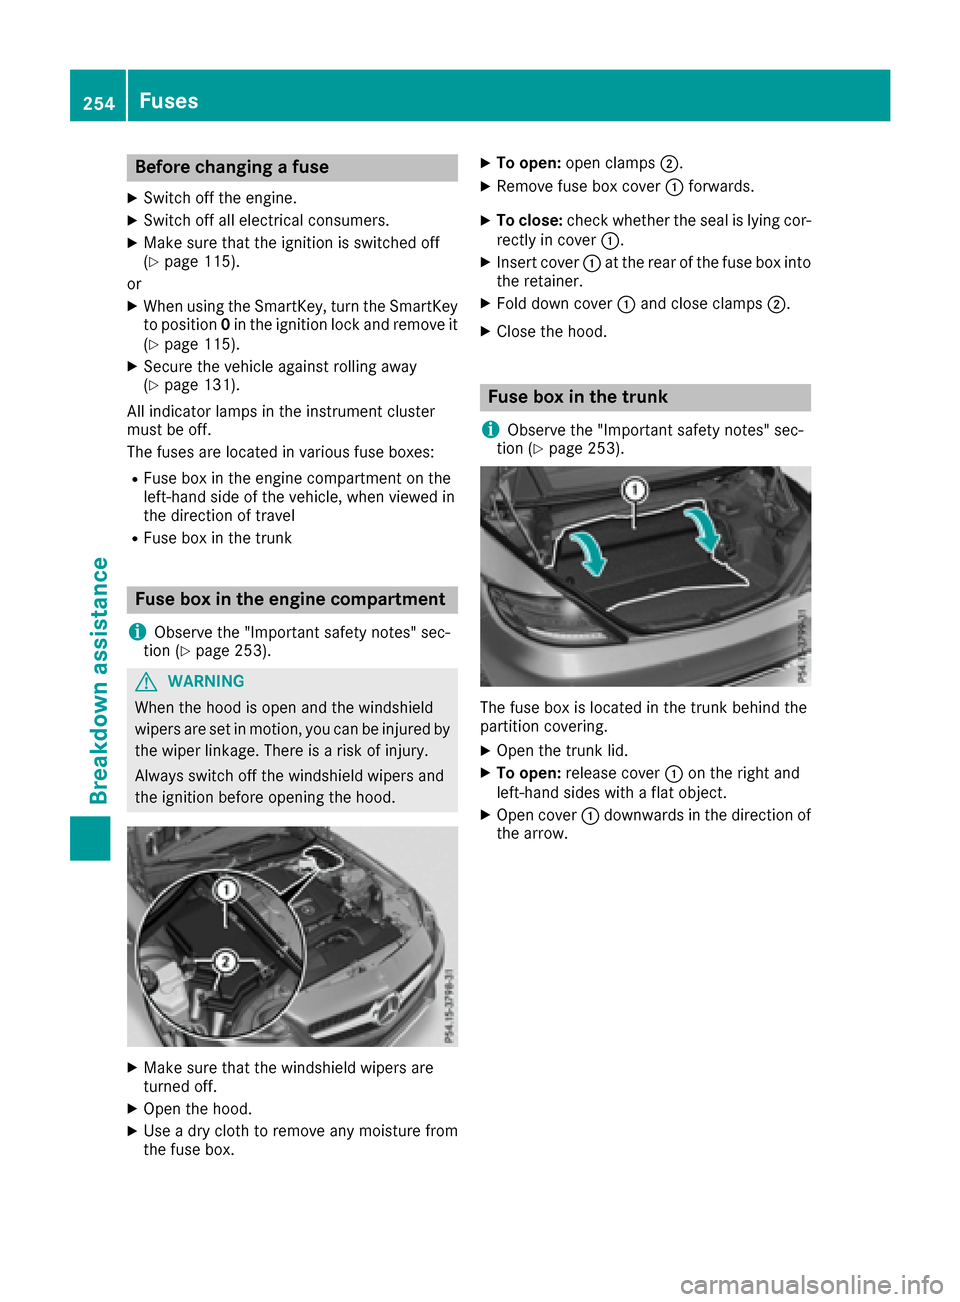 MERCEDES-BENZ SLC-Class 2017 R172 Owners Manual Before changingafuse
XSwitch off the engine.
XSwitch off al lelectrical consumers.
XMake sure thatt he ignition is switched off
(Ypage 115).
or
XWhe nusing the SmartKey, turn the SmartKey
to position 